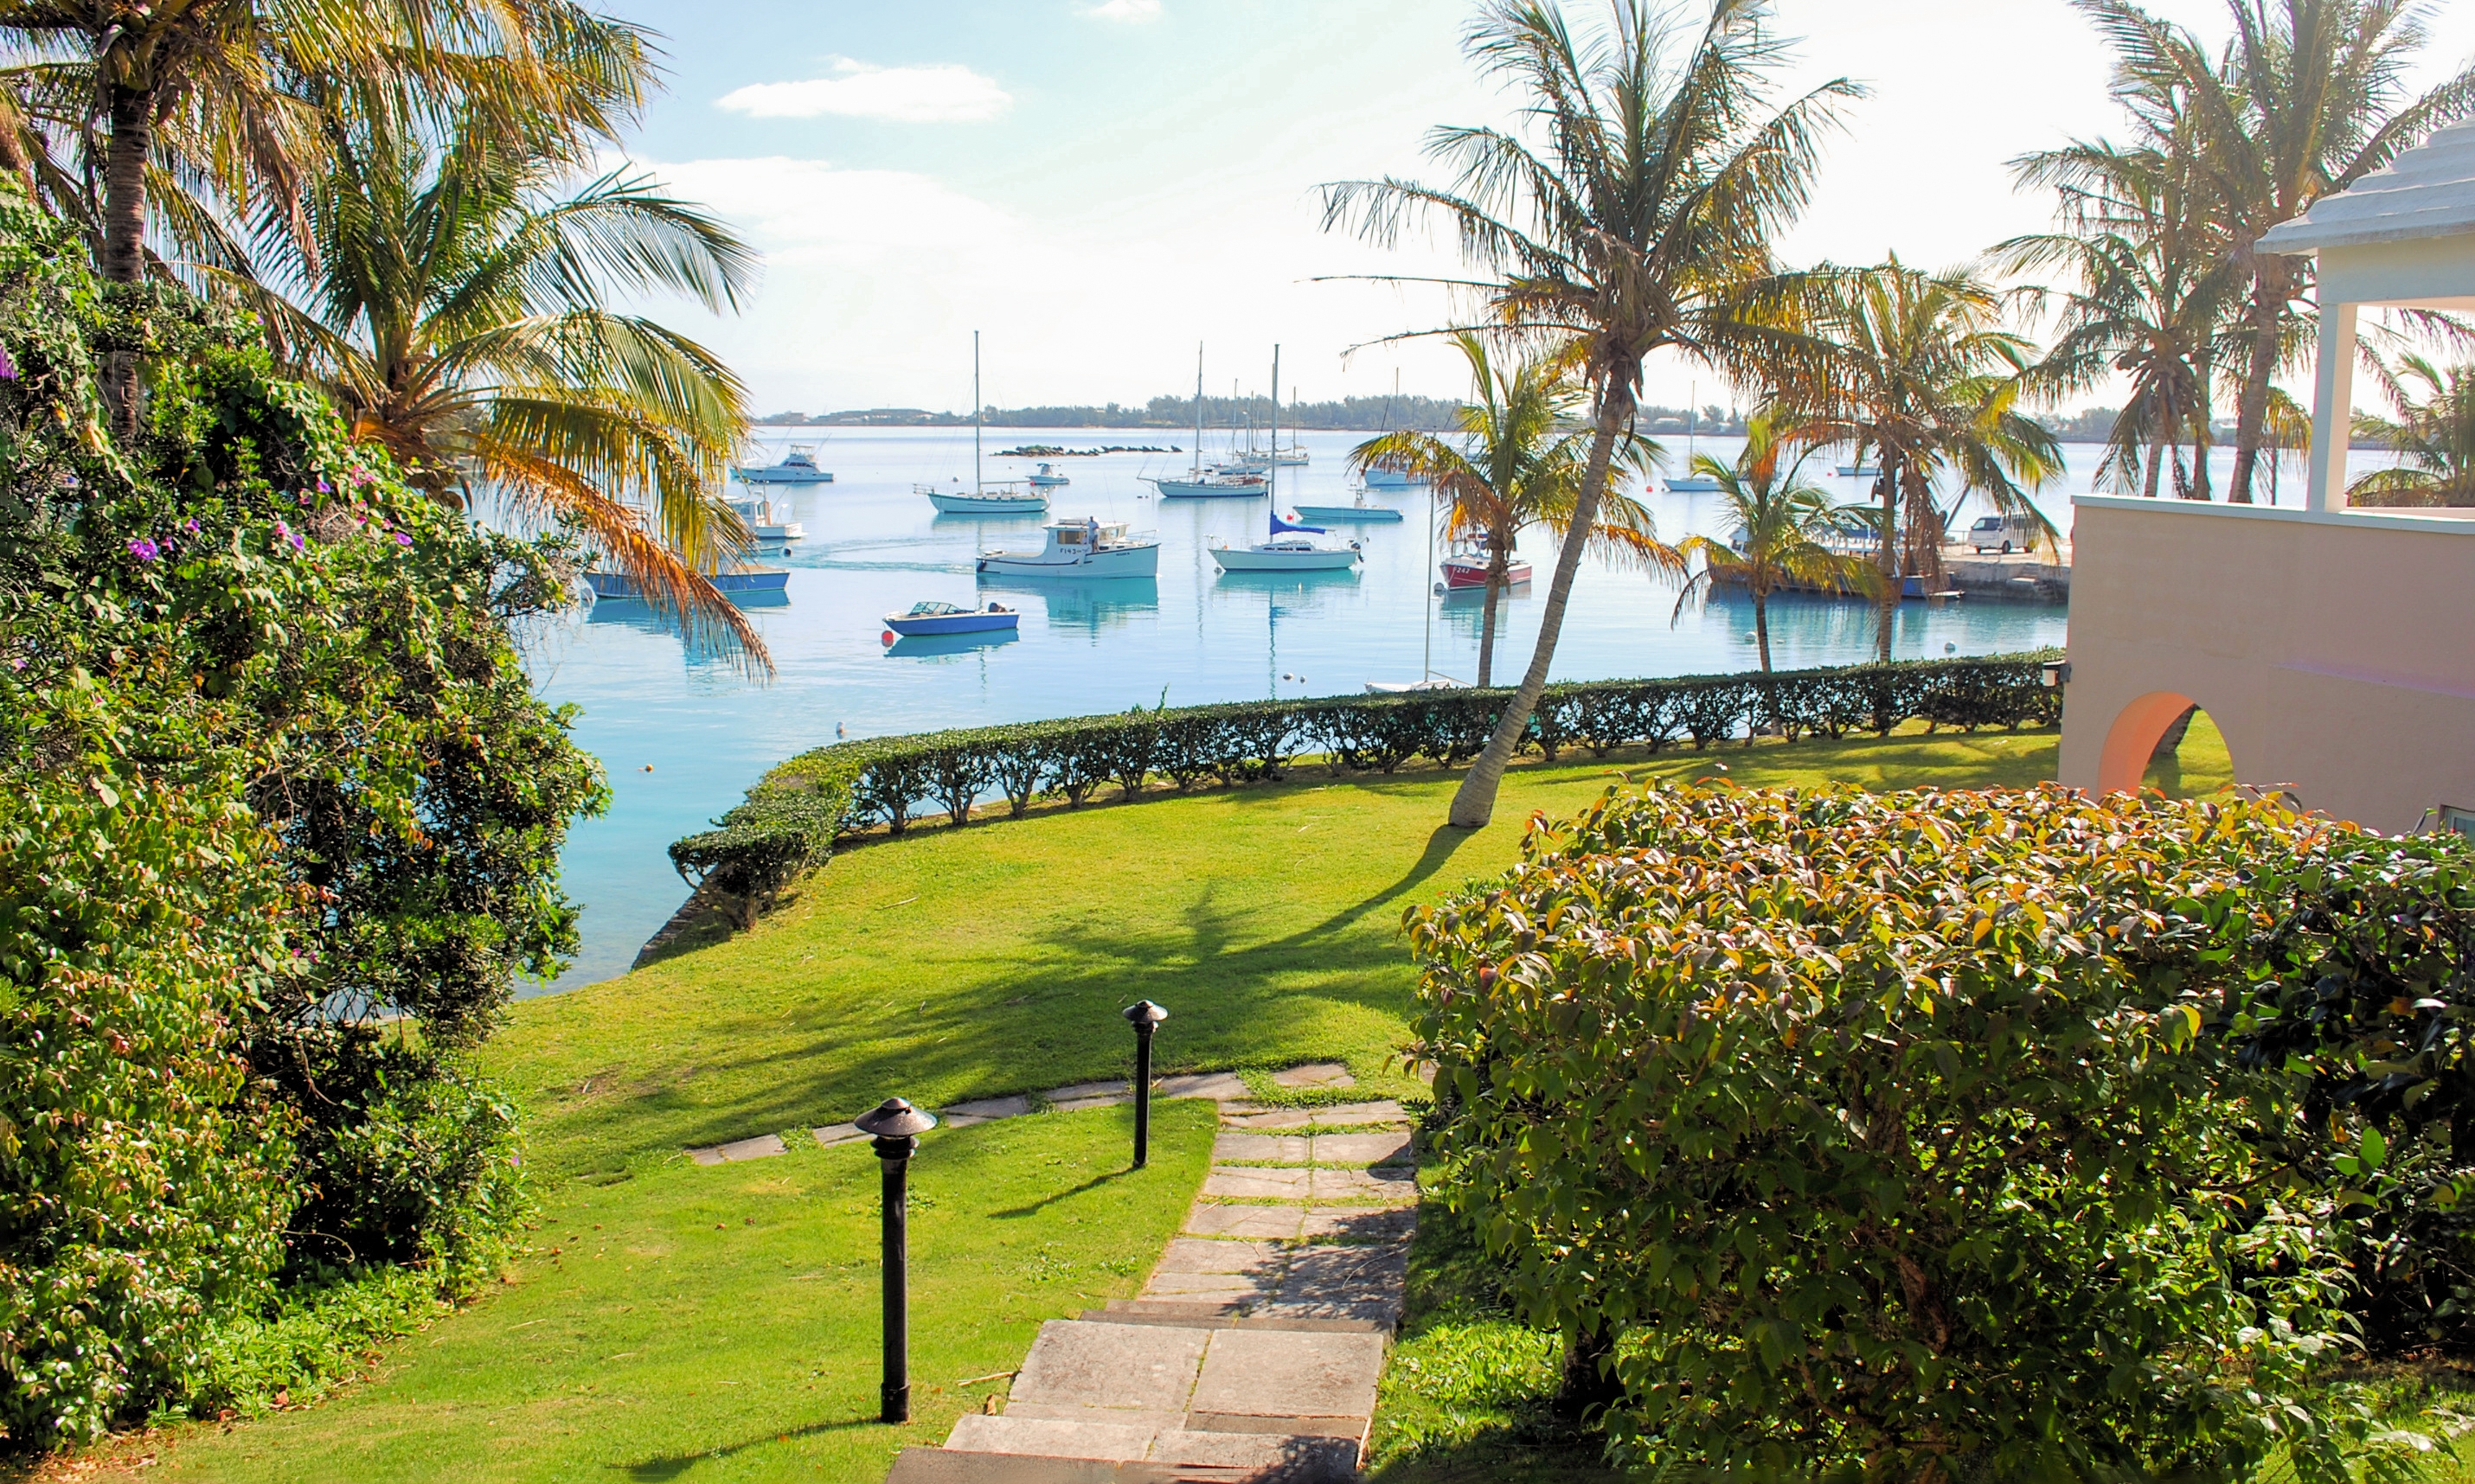 Bermuda: pink beaches, British history and easygoing lifestyle